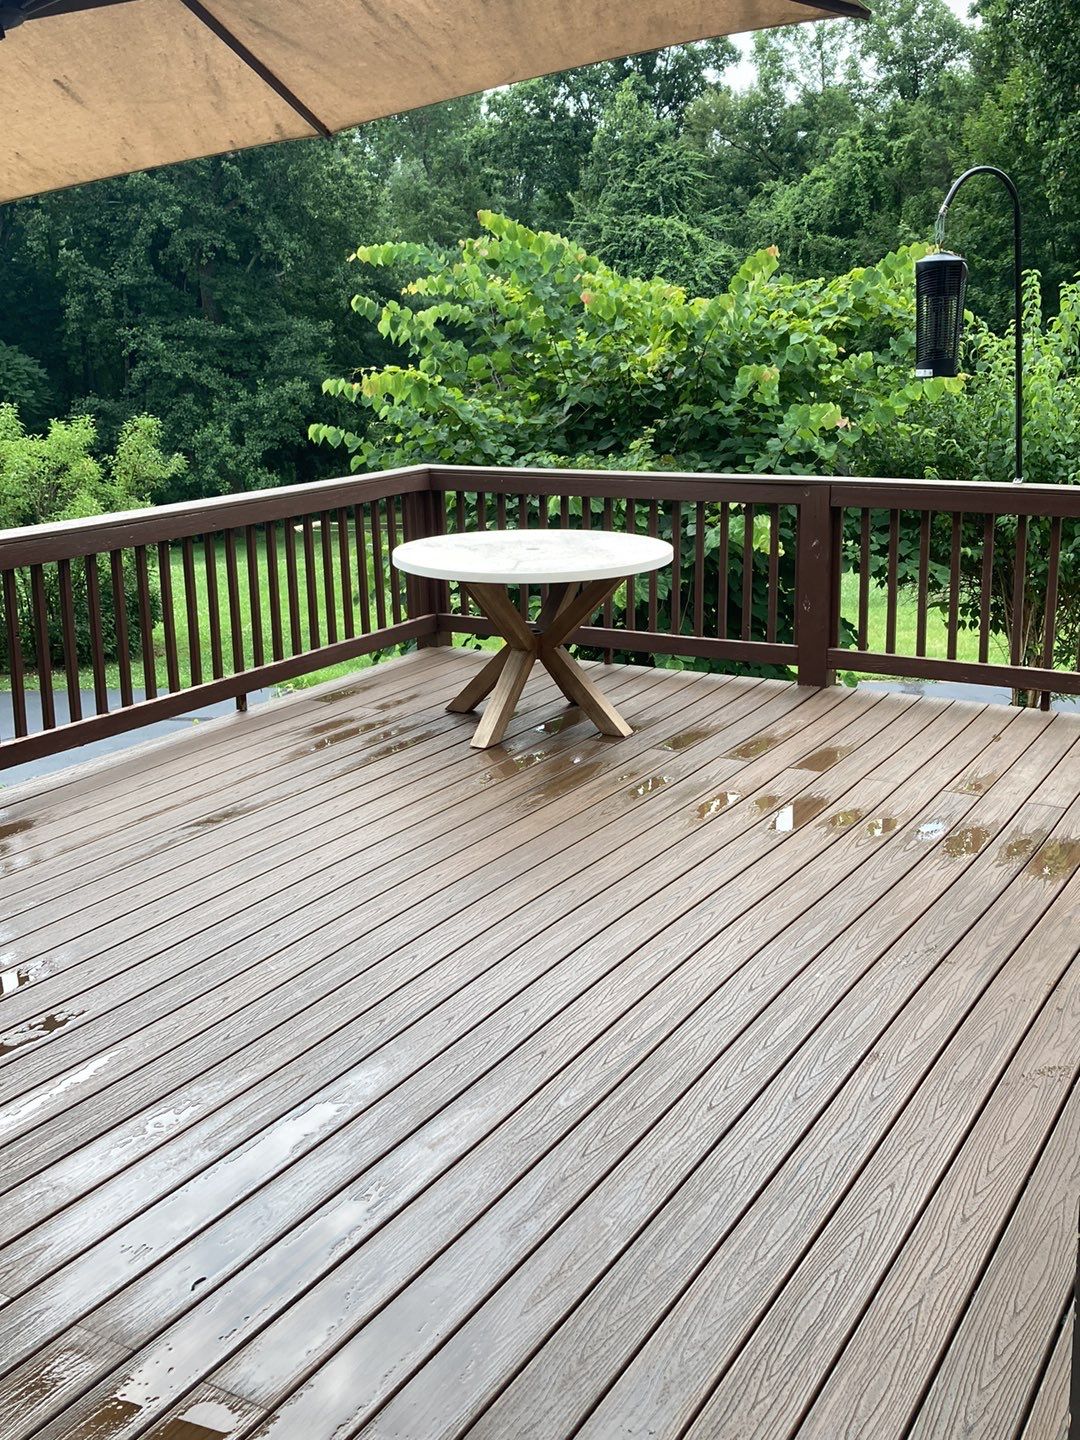 Pressure Washing and Deck Cleaning in Barboursville, VA